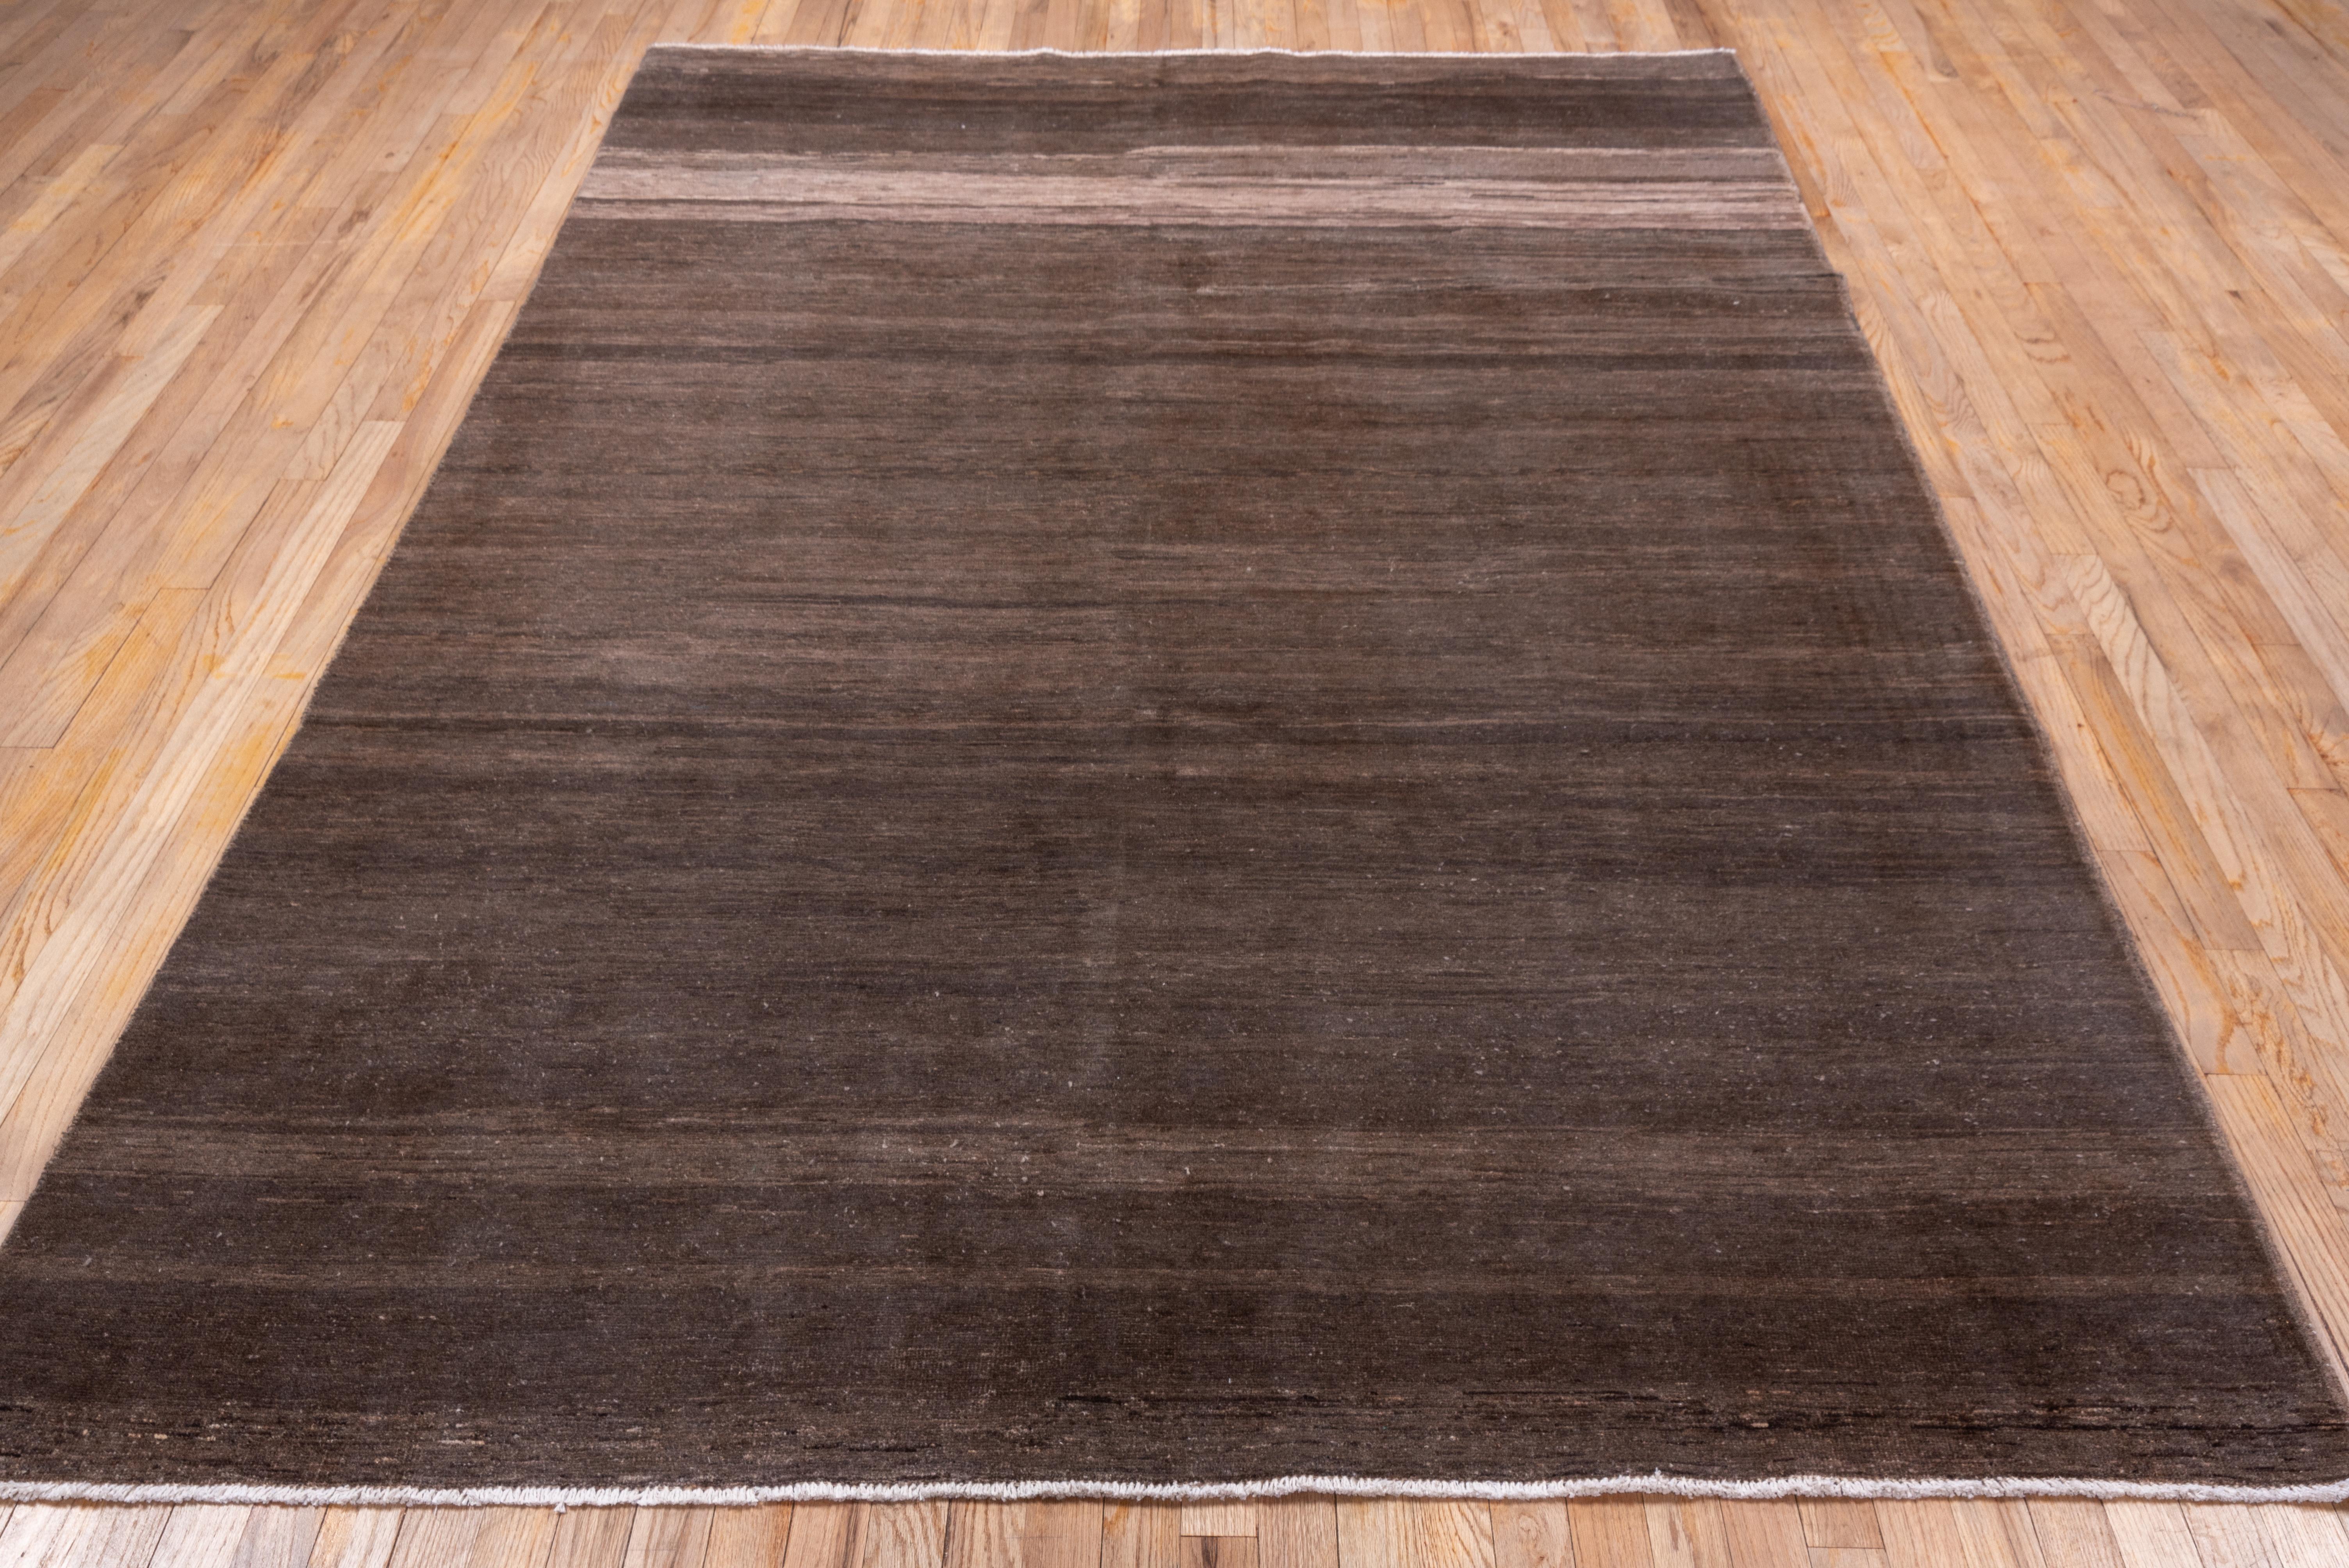 This totally plain, monochrome carpet is a study in well-abrashed natural browns ranging from almost chocolate to variegated beige's. The pile is relatively short, close and resilient.